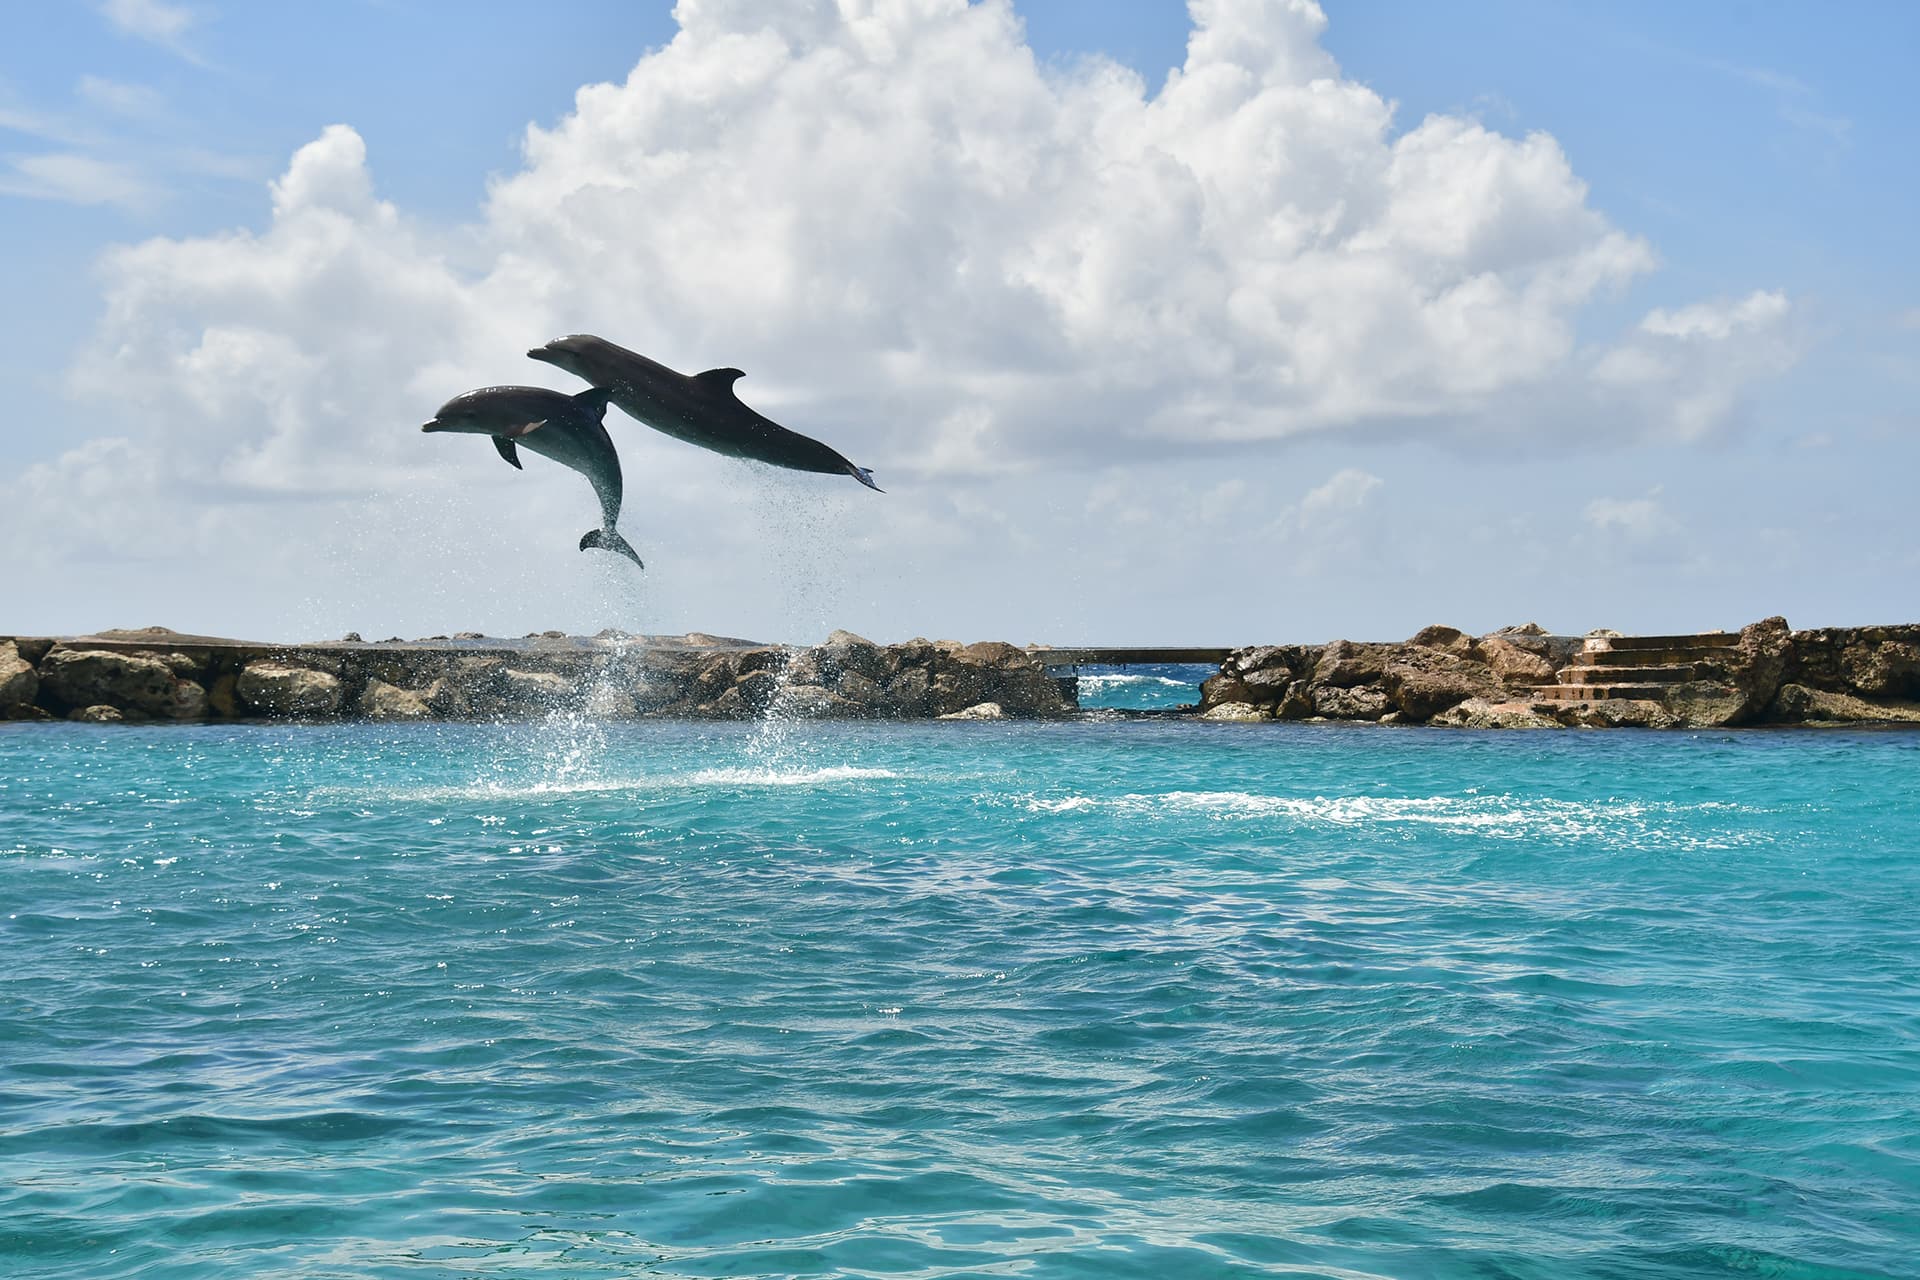 Two dolphins jumping extremely high out of the sea.